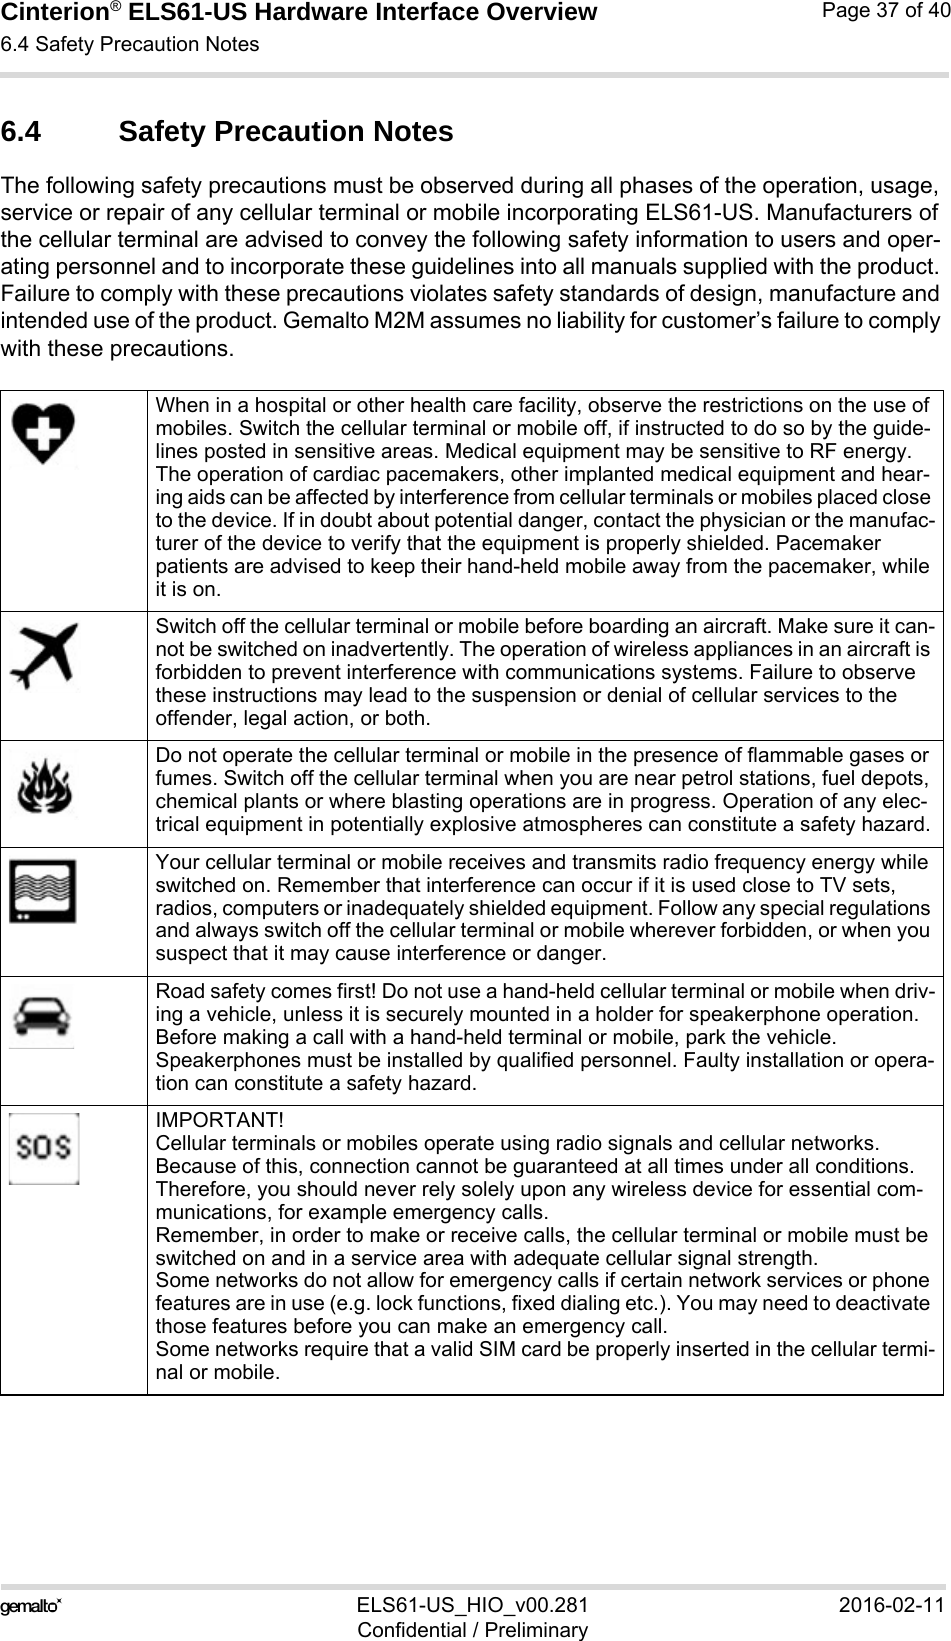 Cinterion® ELS61-US Hardware Interface Overview6.4 Safety Precaution Notes37ELS61-US_HIO_v00.281 2016-02-11Confidential / PreliminaryPage 37 of 406.4 Safety Precaution NotesThe following safety precautions must be observed during all phases of the operation, usage, service or repair of any cellular terminal or mobile incorporating ELS61-US. Manufacturers of the cellular terminal are advised to convey the following safety information to users and oper-ating personnel and to incorporate these guidelines into all manuals supplied with the product. Failure to comply with these precautions violates safety standards of design, manufacture and intended use of the product. Gemalto M2M assumes no liability for customer’s failure to comply with these precautions.When in a hospital or other health care facility, observe the restrictions on the use of mobiles. Switch the cellular terminal or mobile off, if instructed to do so by the guide-lines posted in sensitive areas. Medical equipment may be sensitive to RF energy. The operation of cardiac pacemakers, other implanted medical equipment and hear-ing aids can be affected by interference from cellular terminals or mobiles placed close to the device. If in doubt about potential danger, contact the physician or the manufac-turer of the device to verify that the equipment is properly shielded. Pacemaker patients are advised to keep their hand-held mobile away from the pacemaker, while it is on. Switch off the cellular terminal or mobile before boarding an aircraft. Make sure it can-not be switched on inadvertently. The operation of wireless appliances in an aircraft is forbidden to prevent interference with communications systems. Failure to observe these instructions may lead to the suspension or denial of cellular services to the offender, legal action, or both.Do not operate the cellular terminal or mobile in the presence of flammable gases or fumes. Switch off the cellular terminal when you are near petrol stations, fuel depots, chemical plants or where blasting operations are in progress. Operation of any elec-trical equipment in potentially explosive atmospheres can constitute a safety hazard.Your cellular terminal or mobile receives and transmits radio frequency energy while switched on. Remember that interference can occur if it is used close to TV sets, radios, computers or inadequately shielded equipment. Follow any special regulations and always switch off the cellular terminal or mobile wherever forbidden, or when you suspect that it may cause interference or danger.Road safety comes first! Do not use a hand-held cellular terminal or mobile when driv-ing a vehicle, unless it is securely mounted in a holder for speakerphone operation. Before making a call with a hand-held terminal or mobile, park the vehicle. Speakerphones must be installed by qualified personnel. Faulty installation or opera-tion can constitute a safety hazard.IMPORTANT!Cellular terminals or mobiles operate using radio signals and cellular networks. Because of this, connection cannot be guaranteed at all times under all conditions. Therefore, you should never rely solely upon any wireless device for essential com-munications, for example emergency calls. Remember, in order to make or receive calls, the cellular terminal or mobile must be switched on and in a service area with adequate cellular signal strength. Some networks do not allow for emergency calls if certain network services or phone features are in use (e.g. lock functions, fixed dialing etc.). You may need to deactivate those features before you can make an emergency call.Some networks require that a valid SIM card be properly inserted in the cellular termi-nal or mobile.